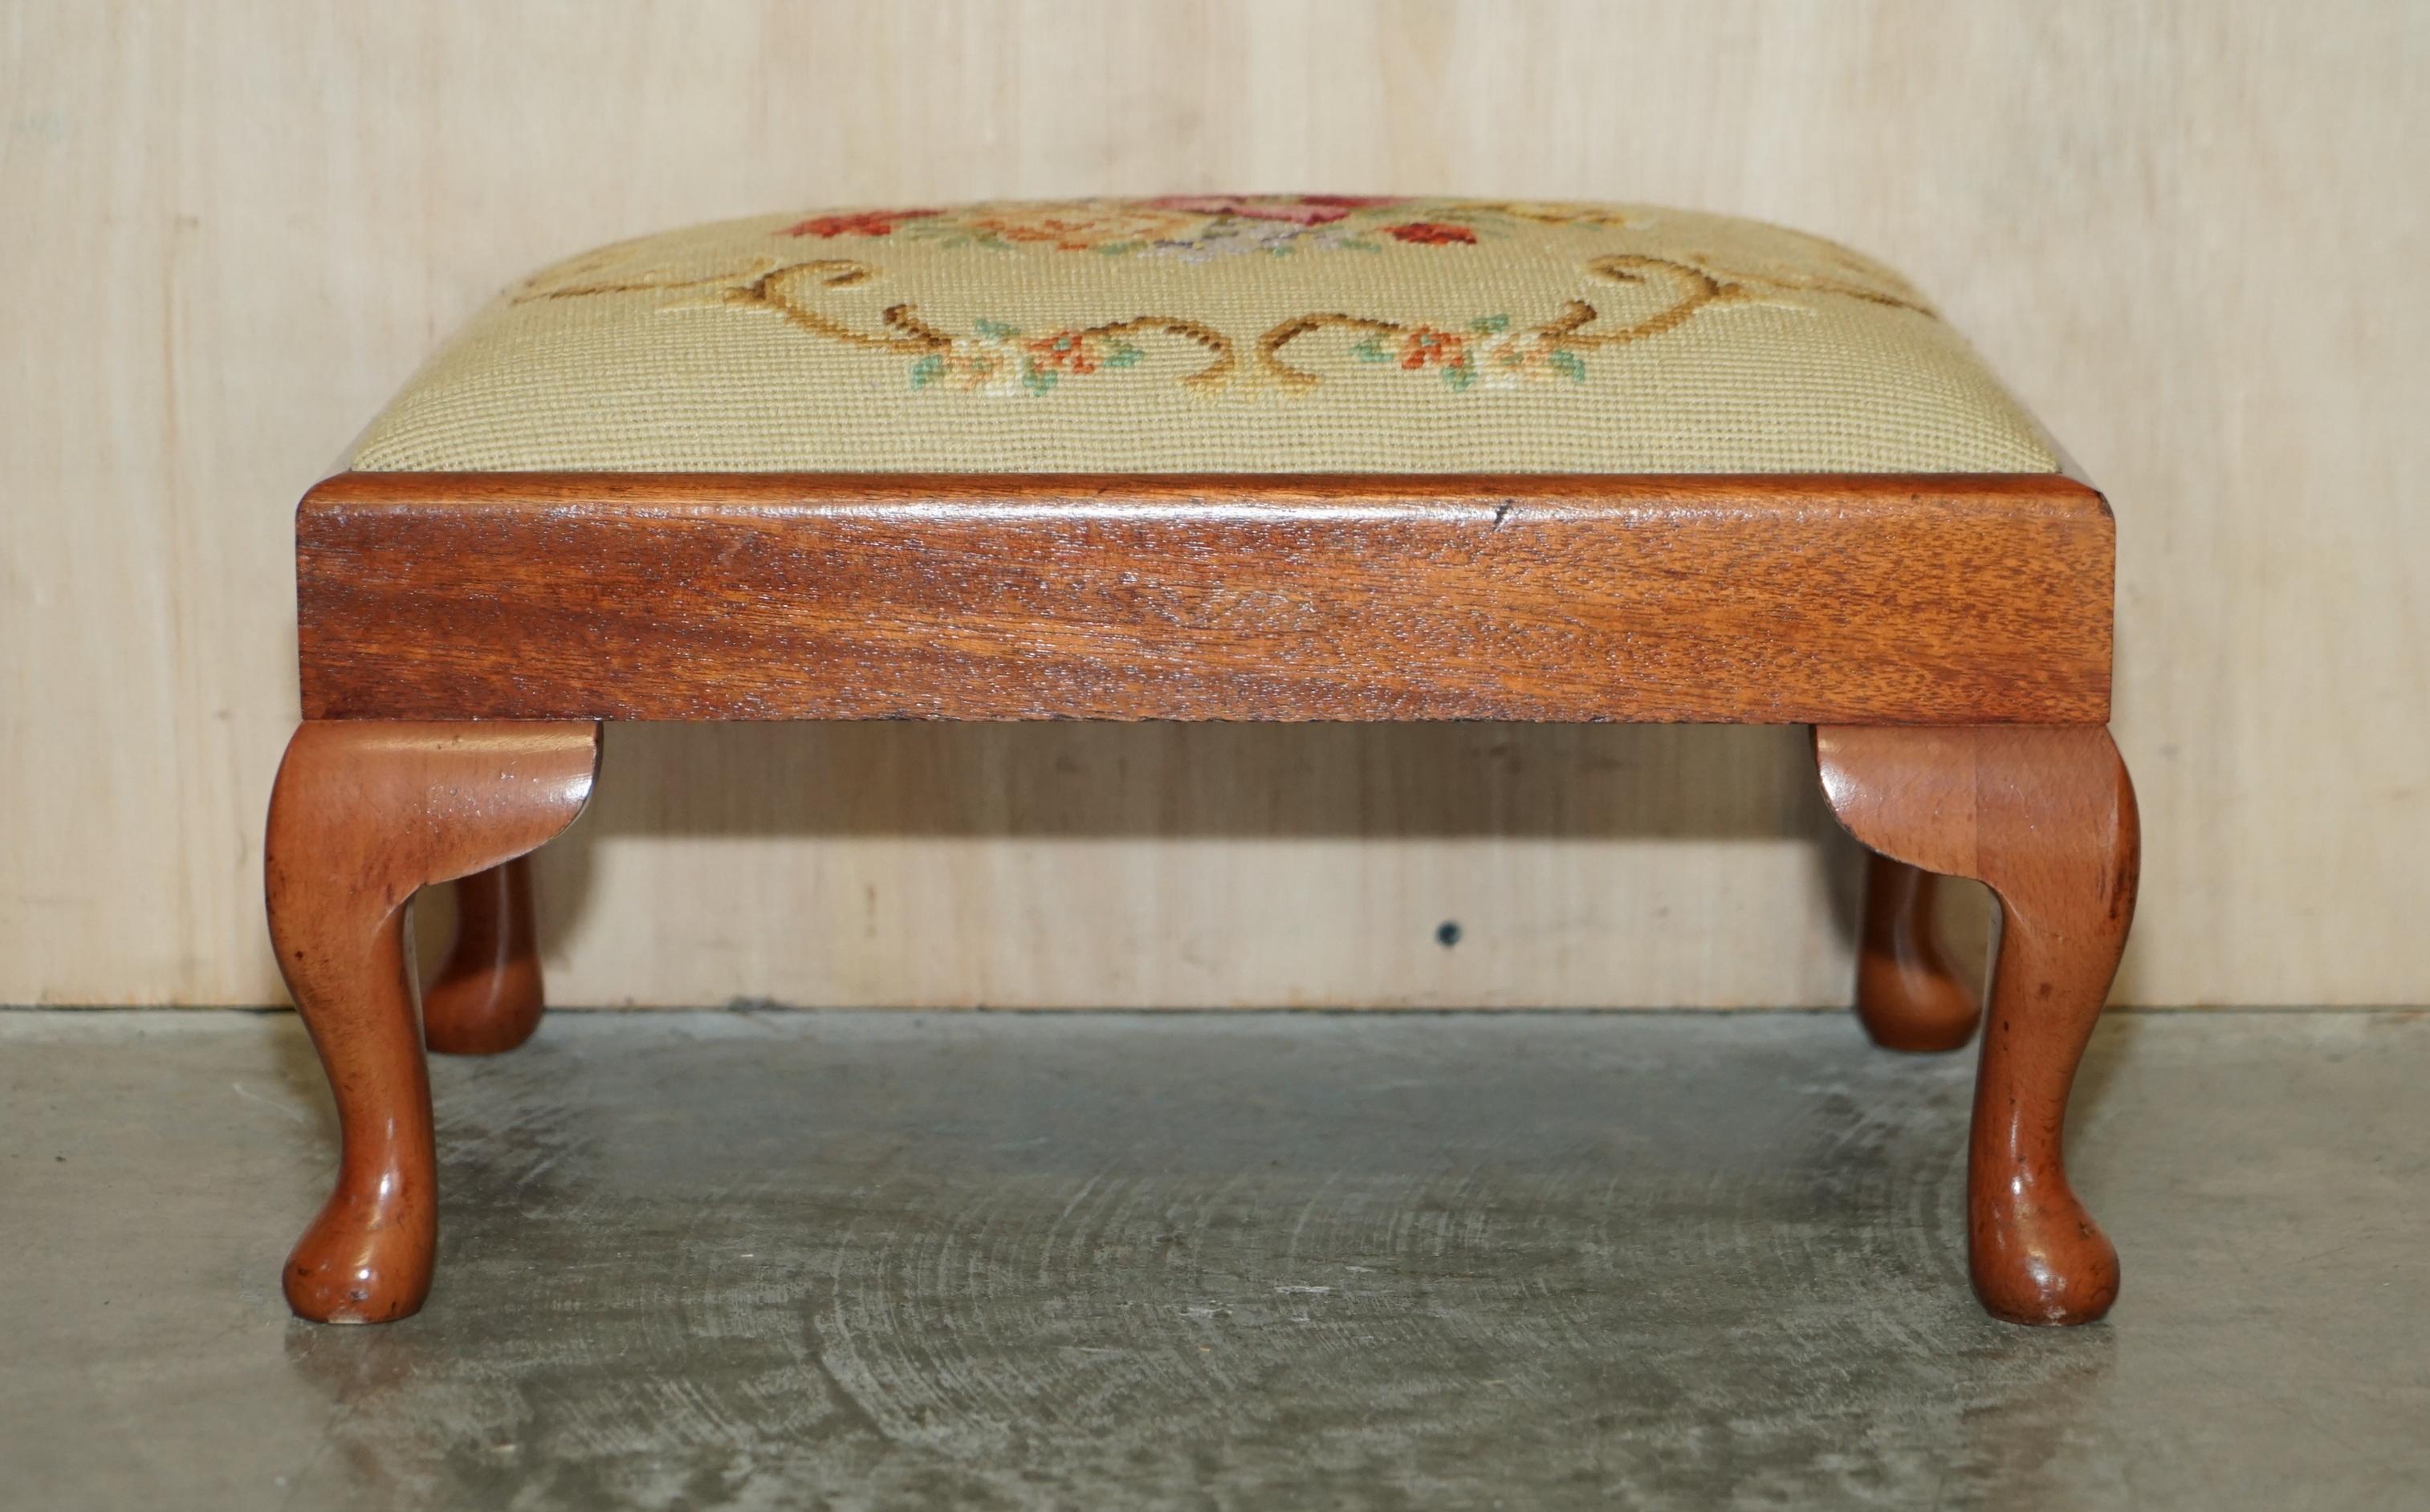 We are delighted to offer for sale this lovely original Victorian circa 1880 hand carved walnut Cabriolet legged footstool with floral embroidered upholstery 

A very decorative and well made piece, the top has a period Victorian embroidery of